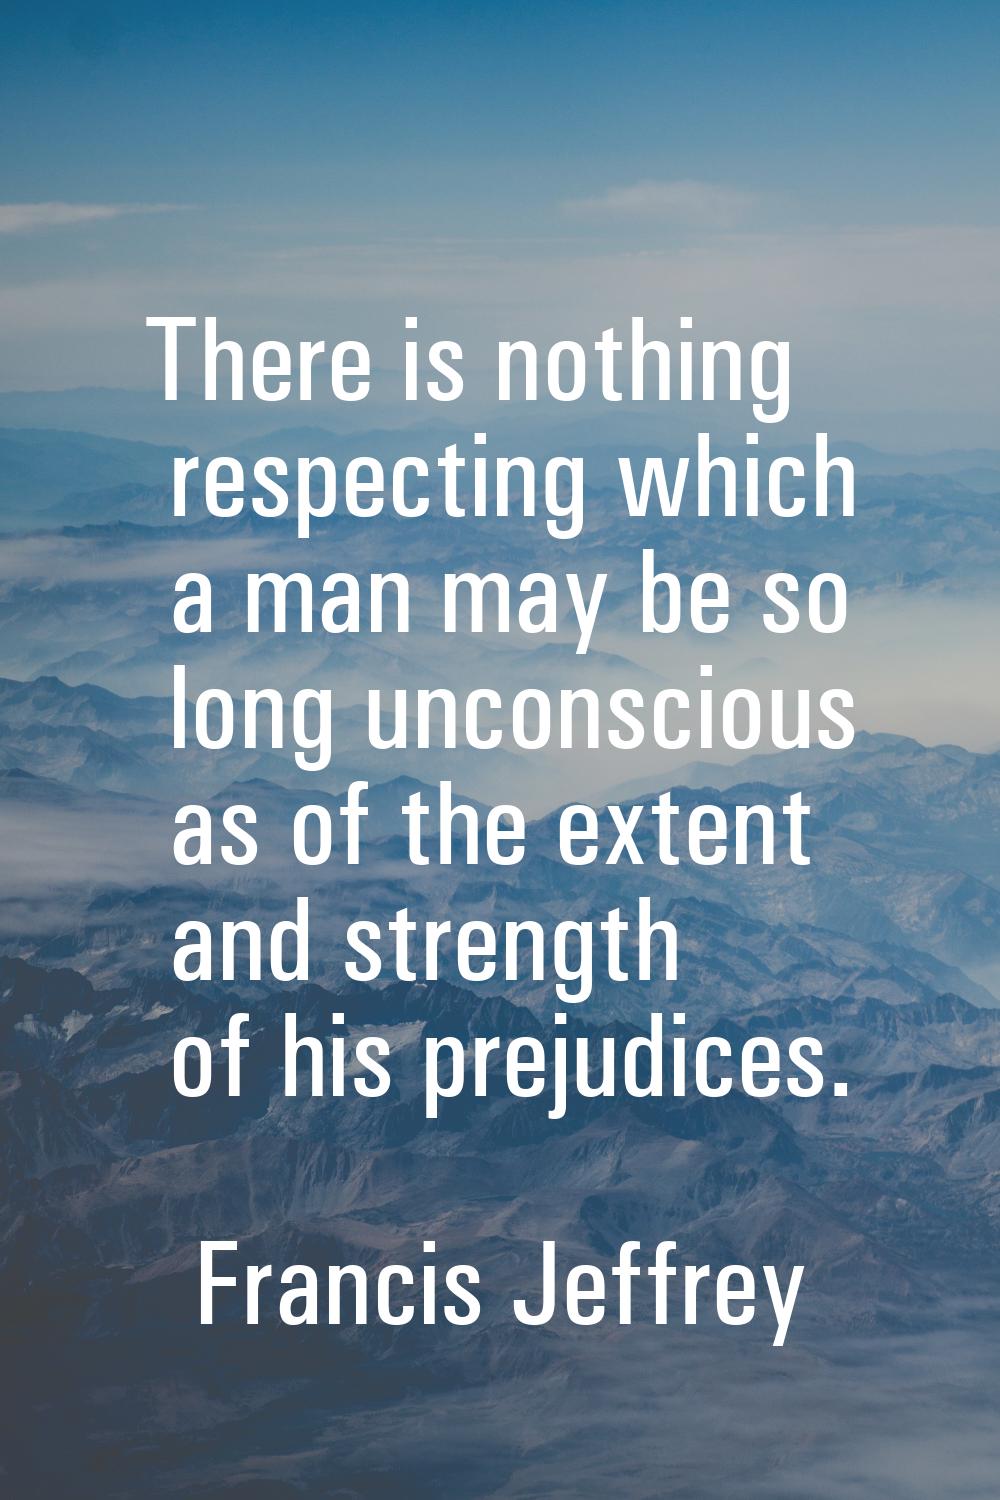 There is nothing respecting which a man may be so long unconscious as of the extent and strength of